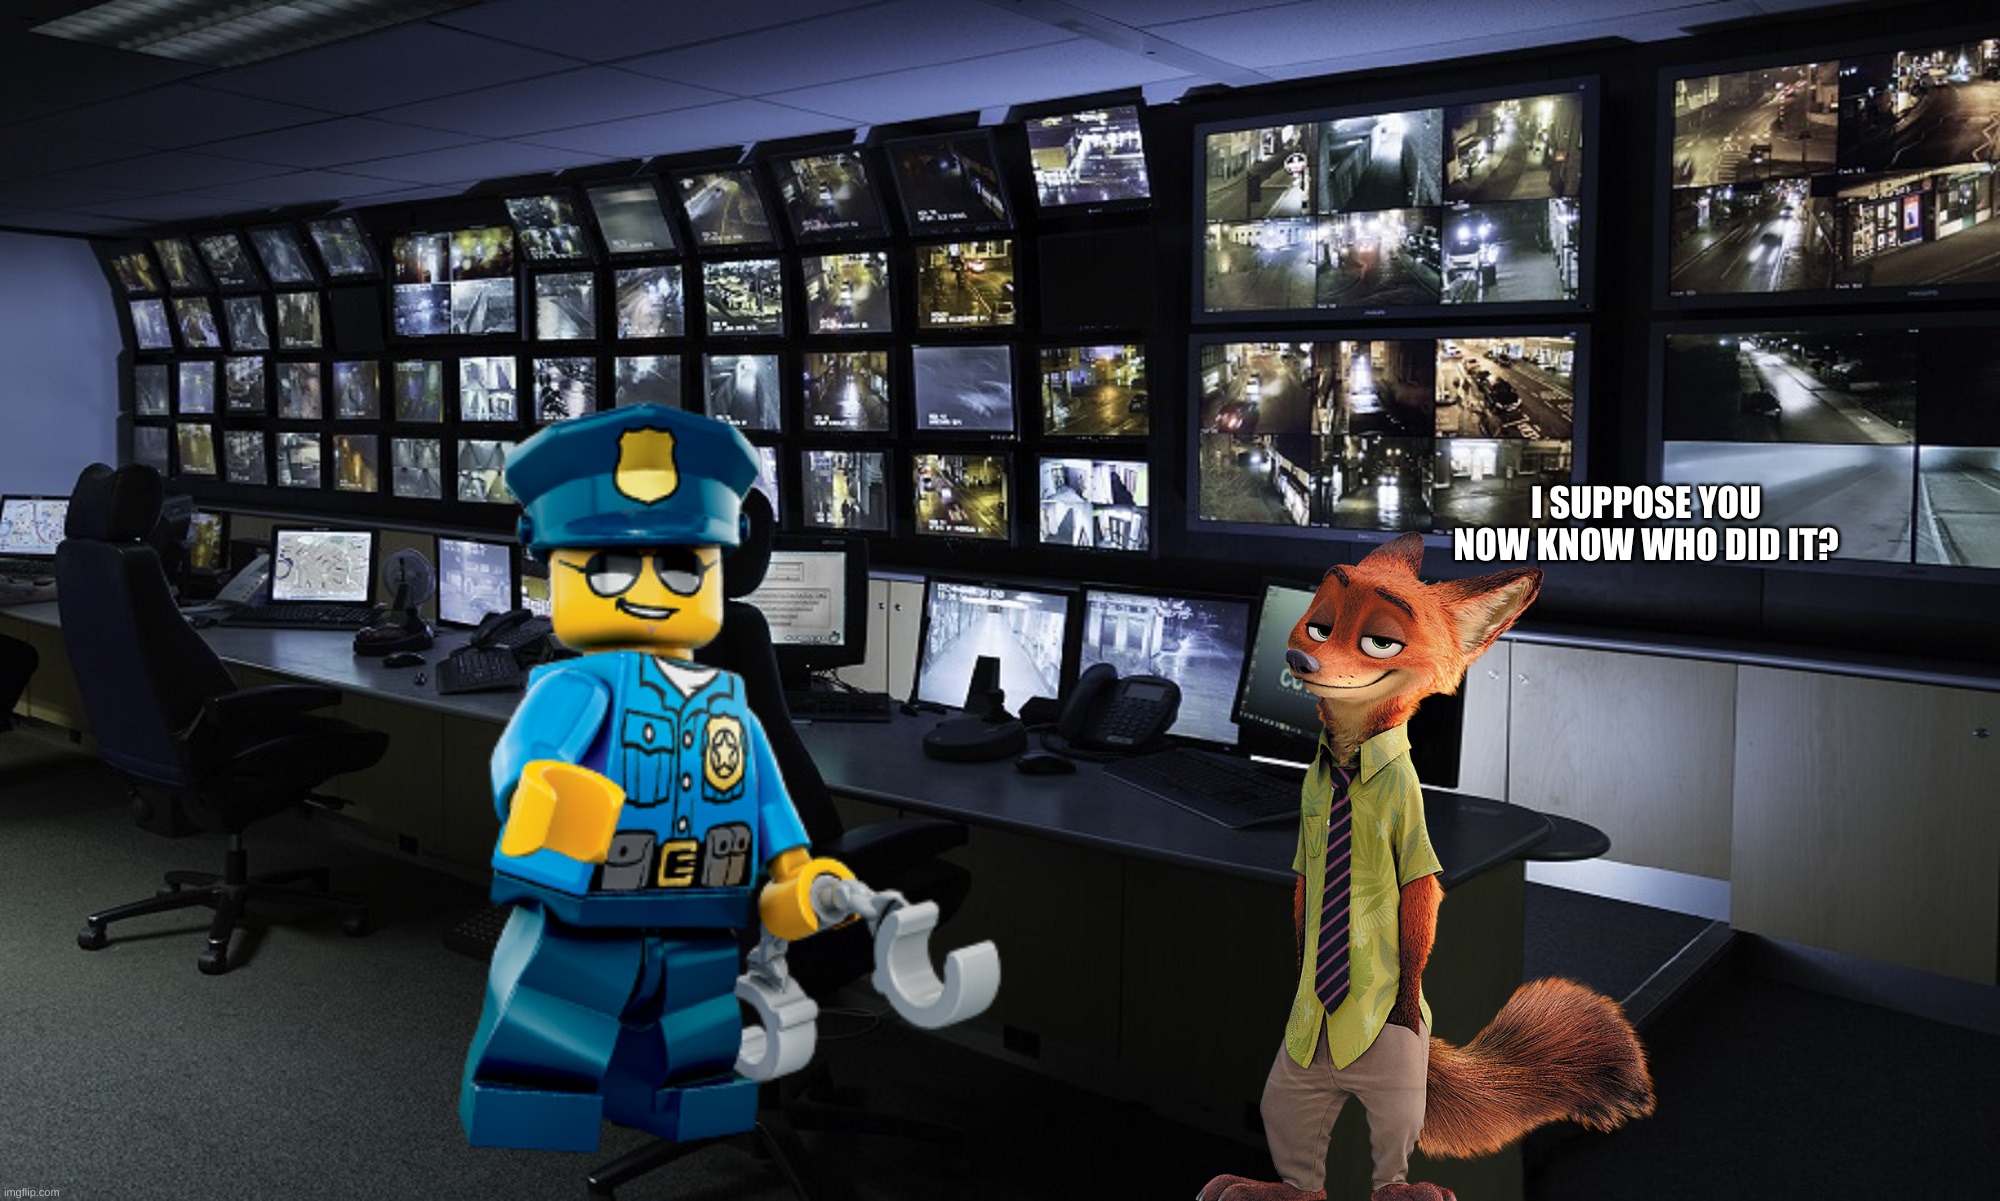 CCTV | I SUPPOSE YOU NOW KNOW WHO DID IT? | image tagged in cctv | made w/ Imgflip meme maker